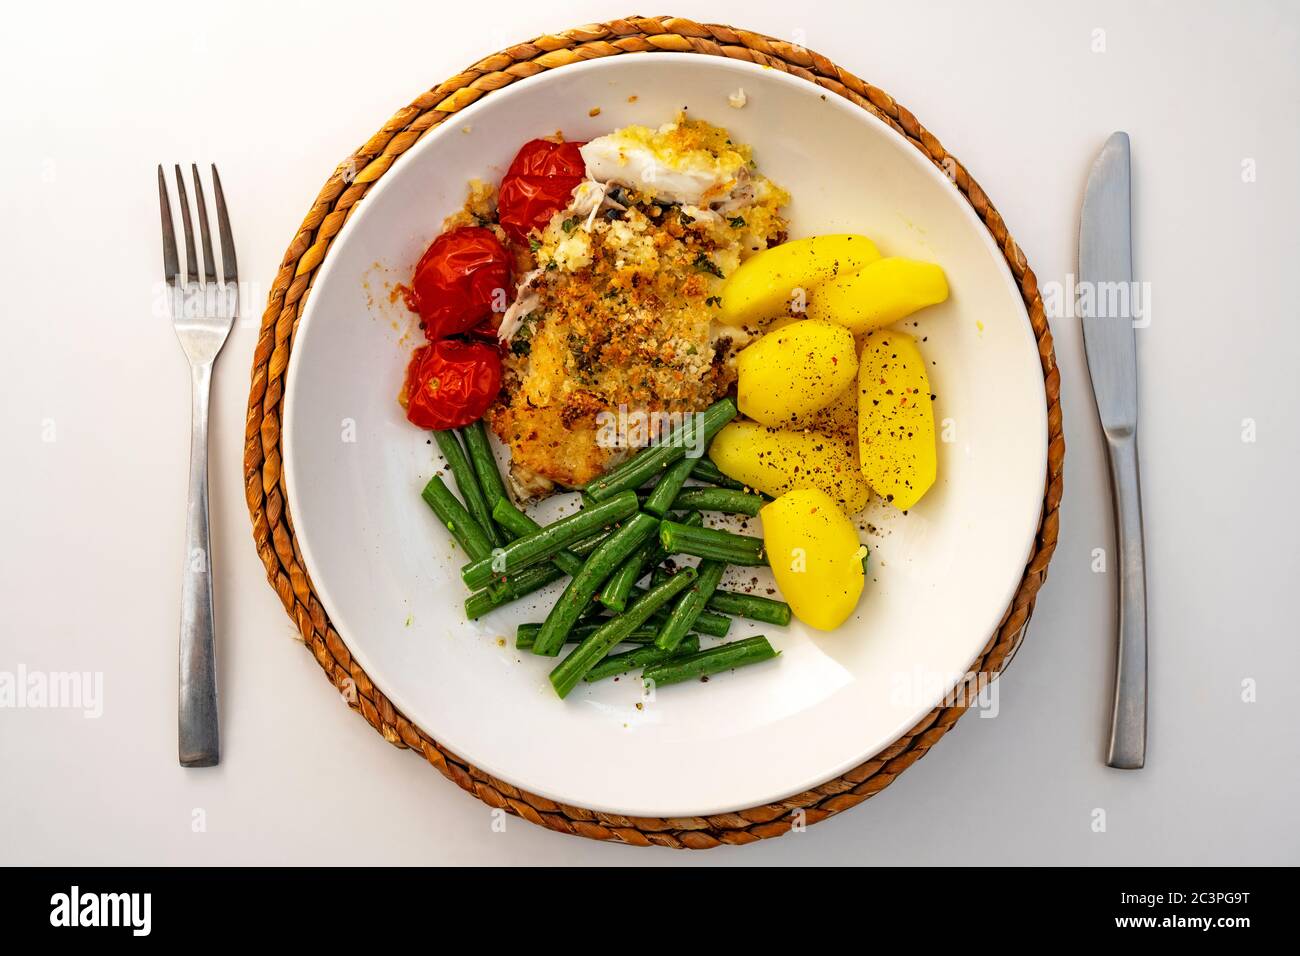 Parsley-crusted cod, runner beans and boiled potatoes Stock Photo